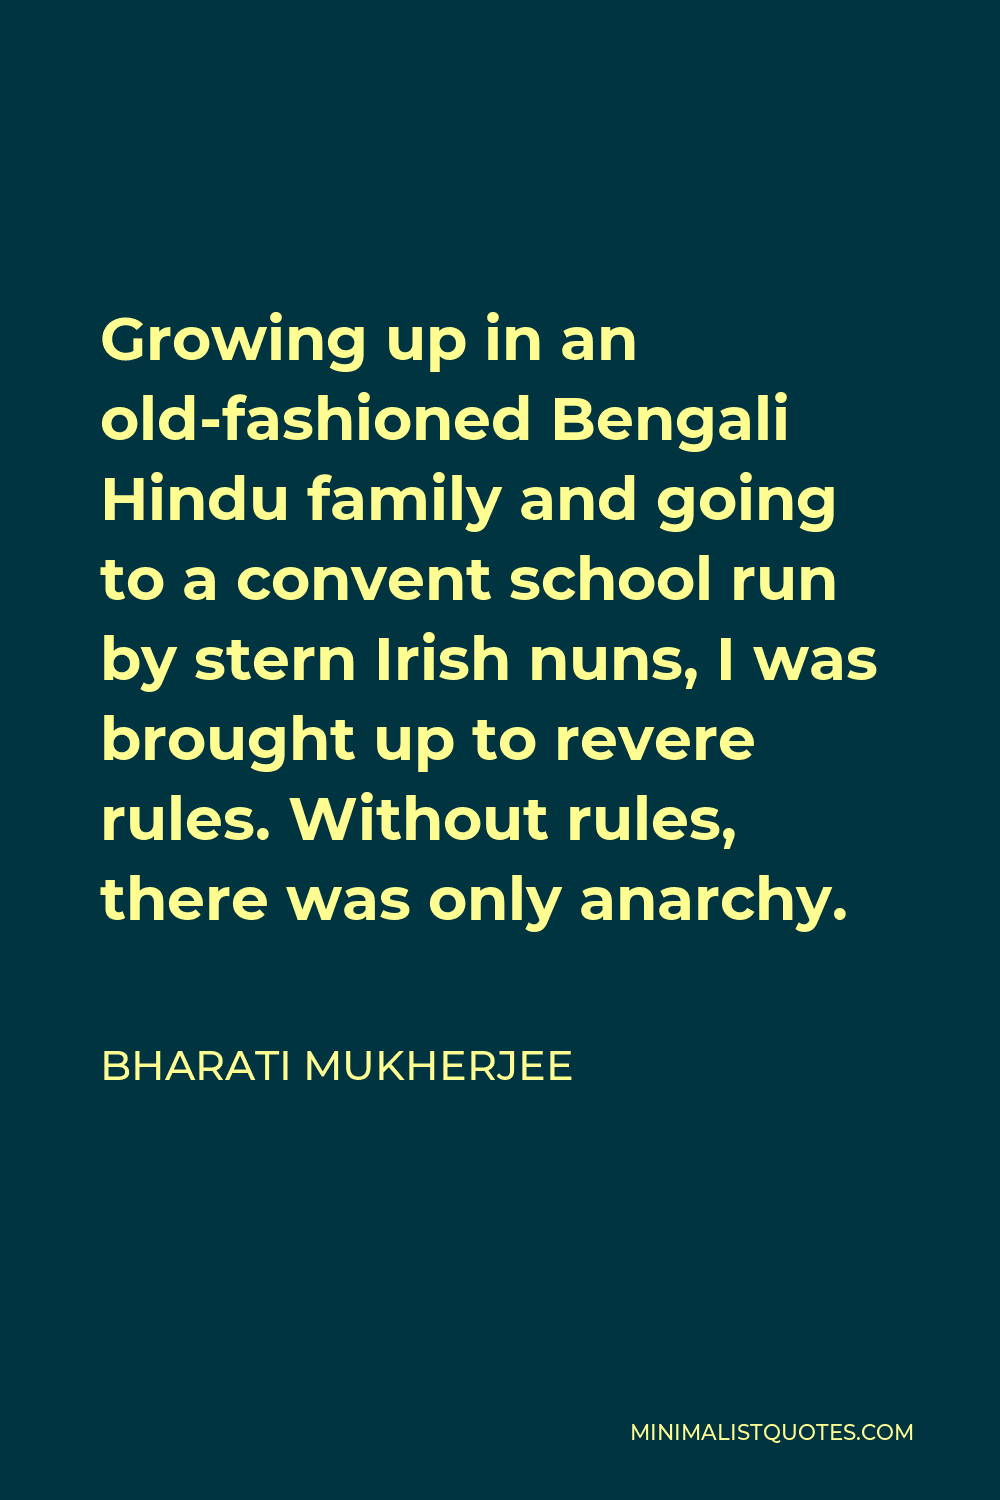 Bharati Mukherjee Quote - Growing up in an old-fashioned Bengali Hindu family and going to a convent school run by stern Irish nuns, I was brought up to revere rules. Without rules, there was only anarchy.